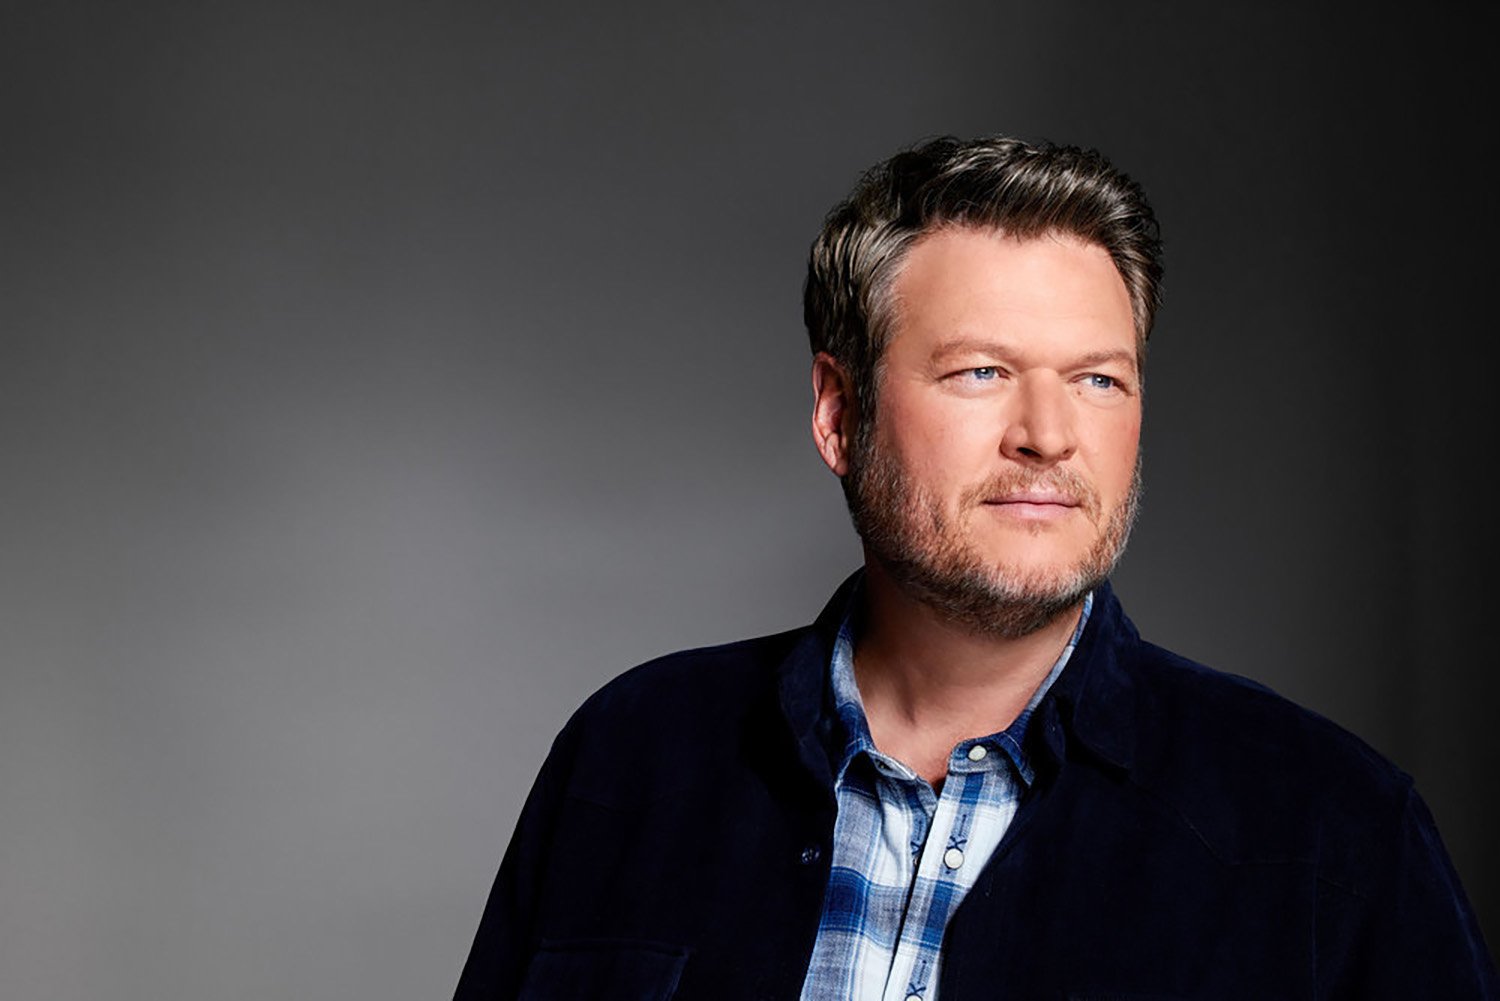 Blake Shelton, wearing a blue plaid flannel and a black jacket, poses against a gray backdrop for The Voice Season 23.